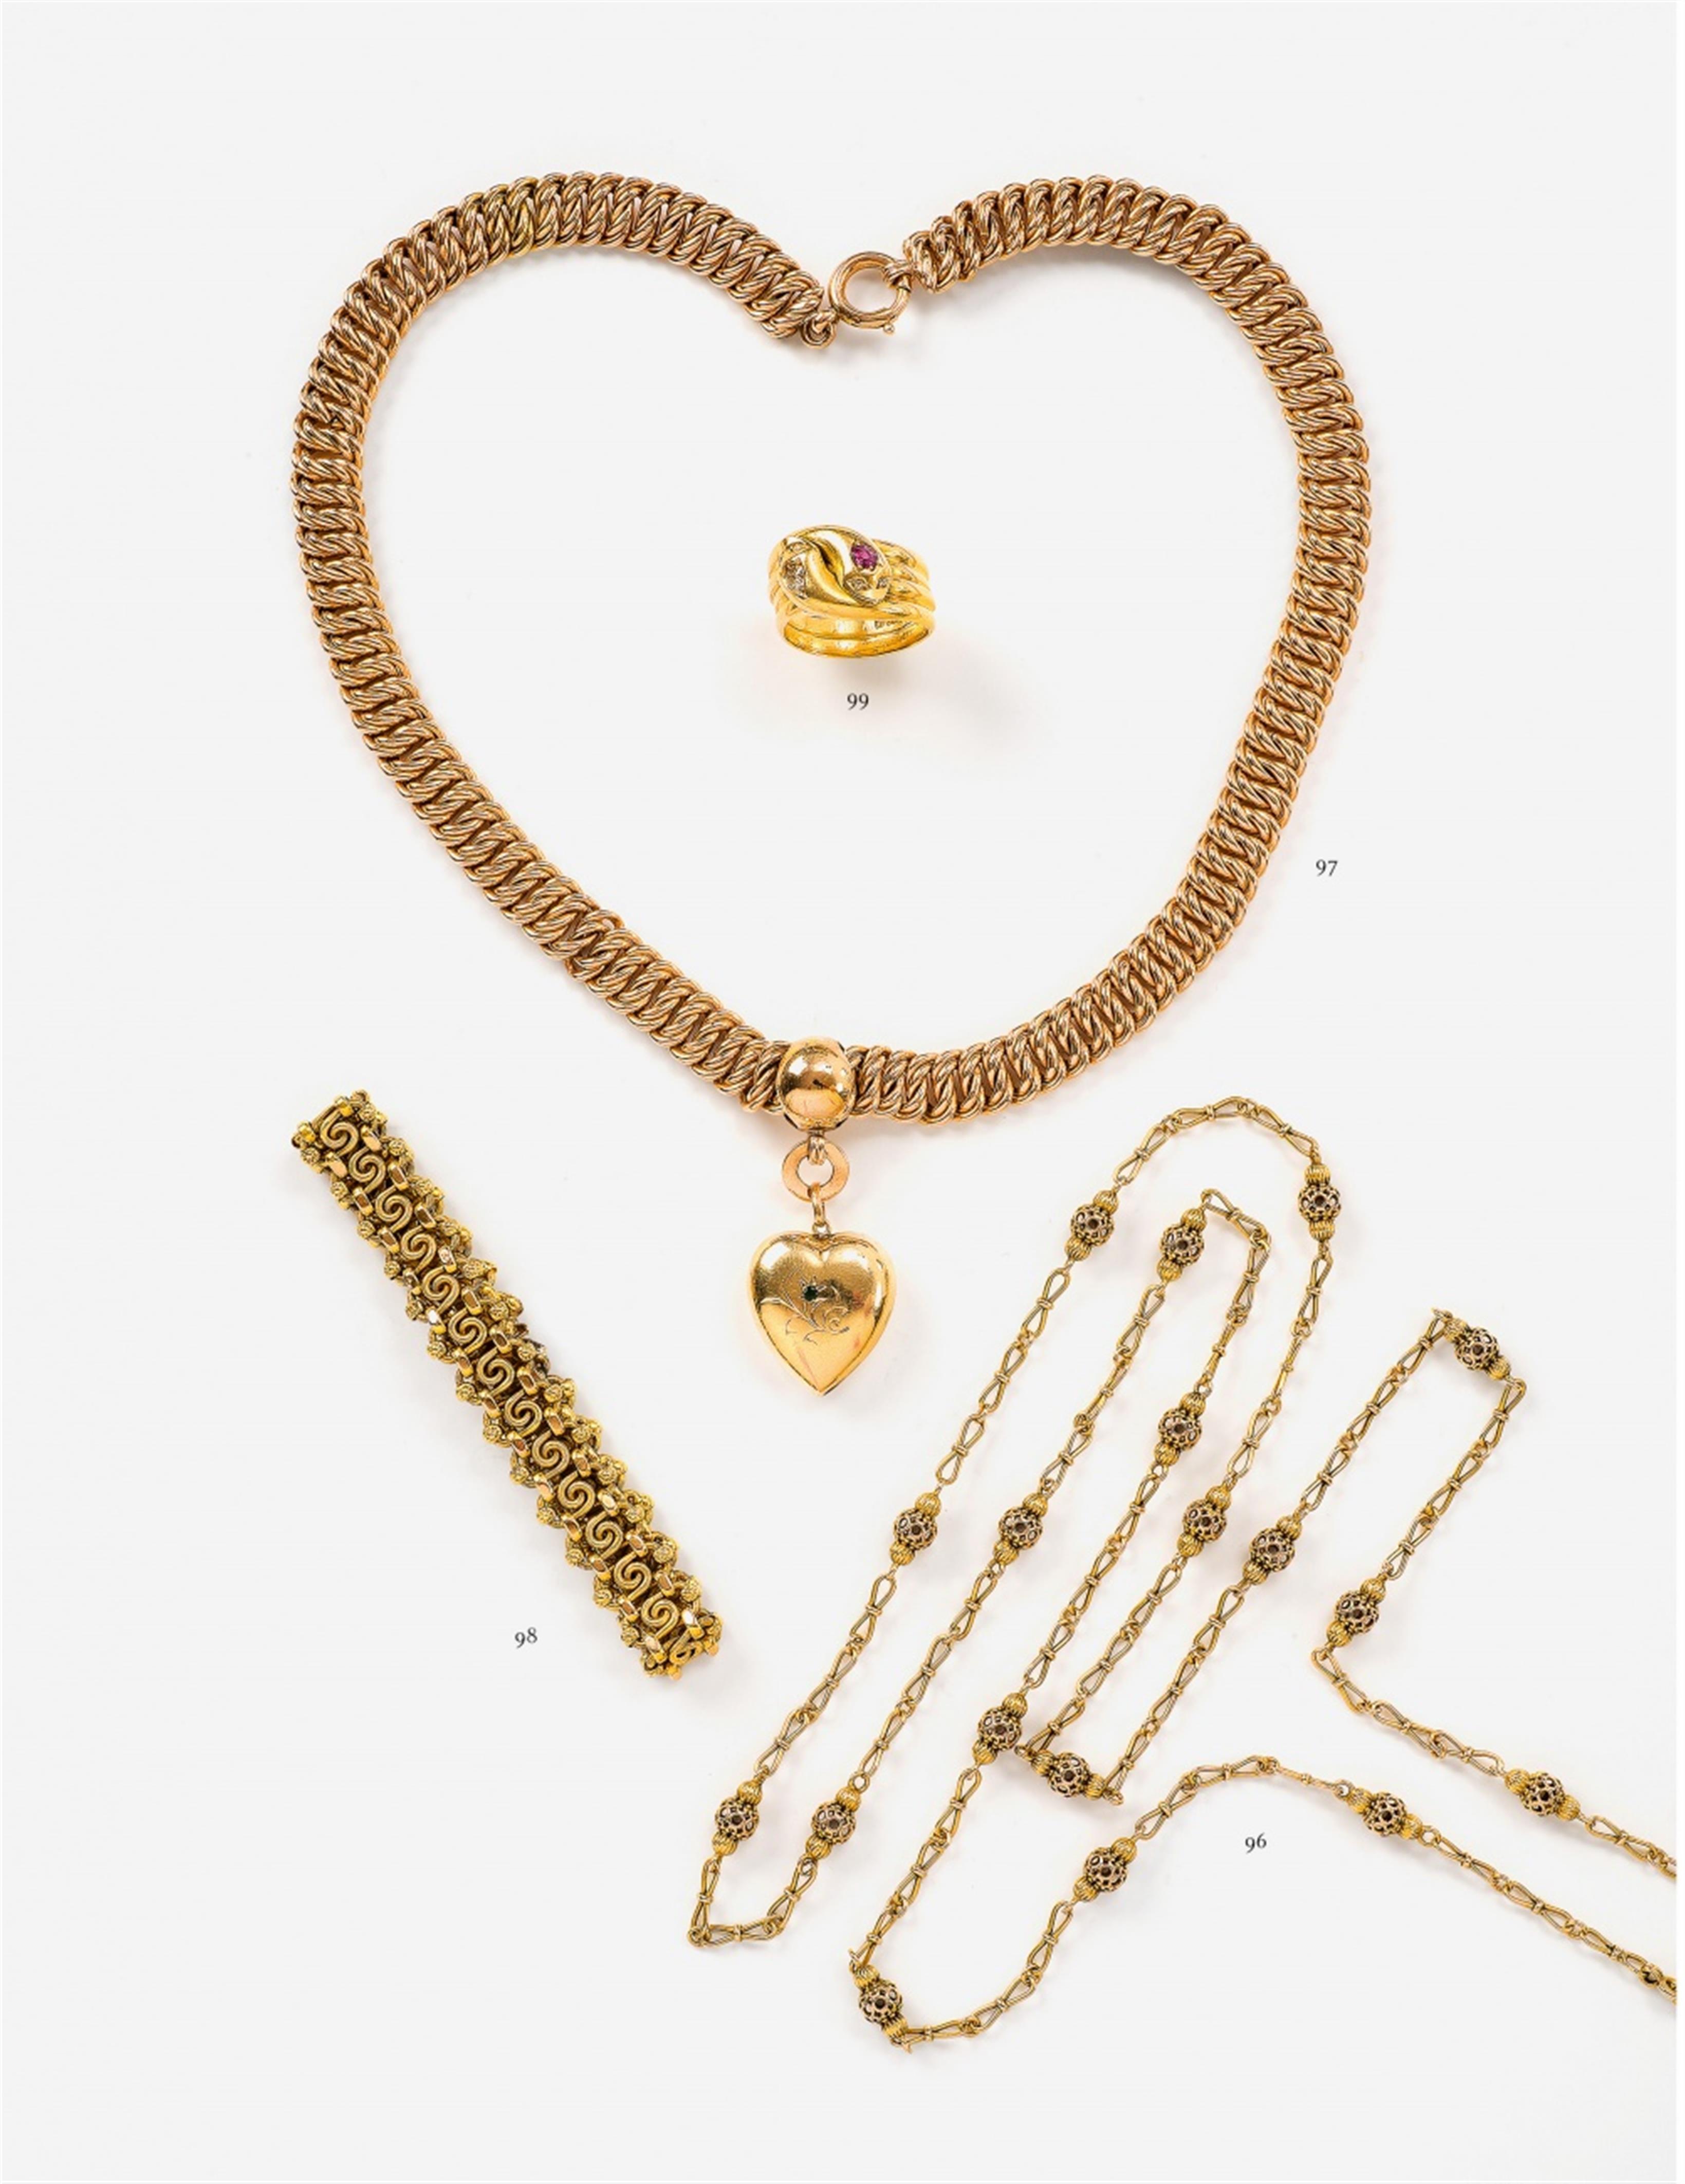 A 14k gold chain with a heart pendant - image-1